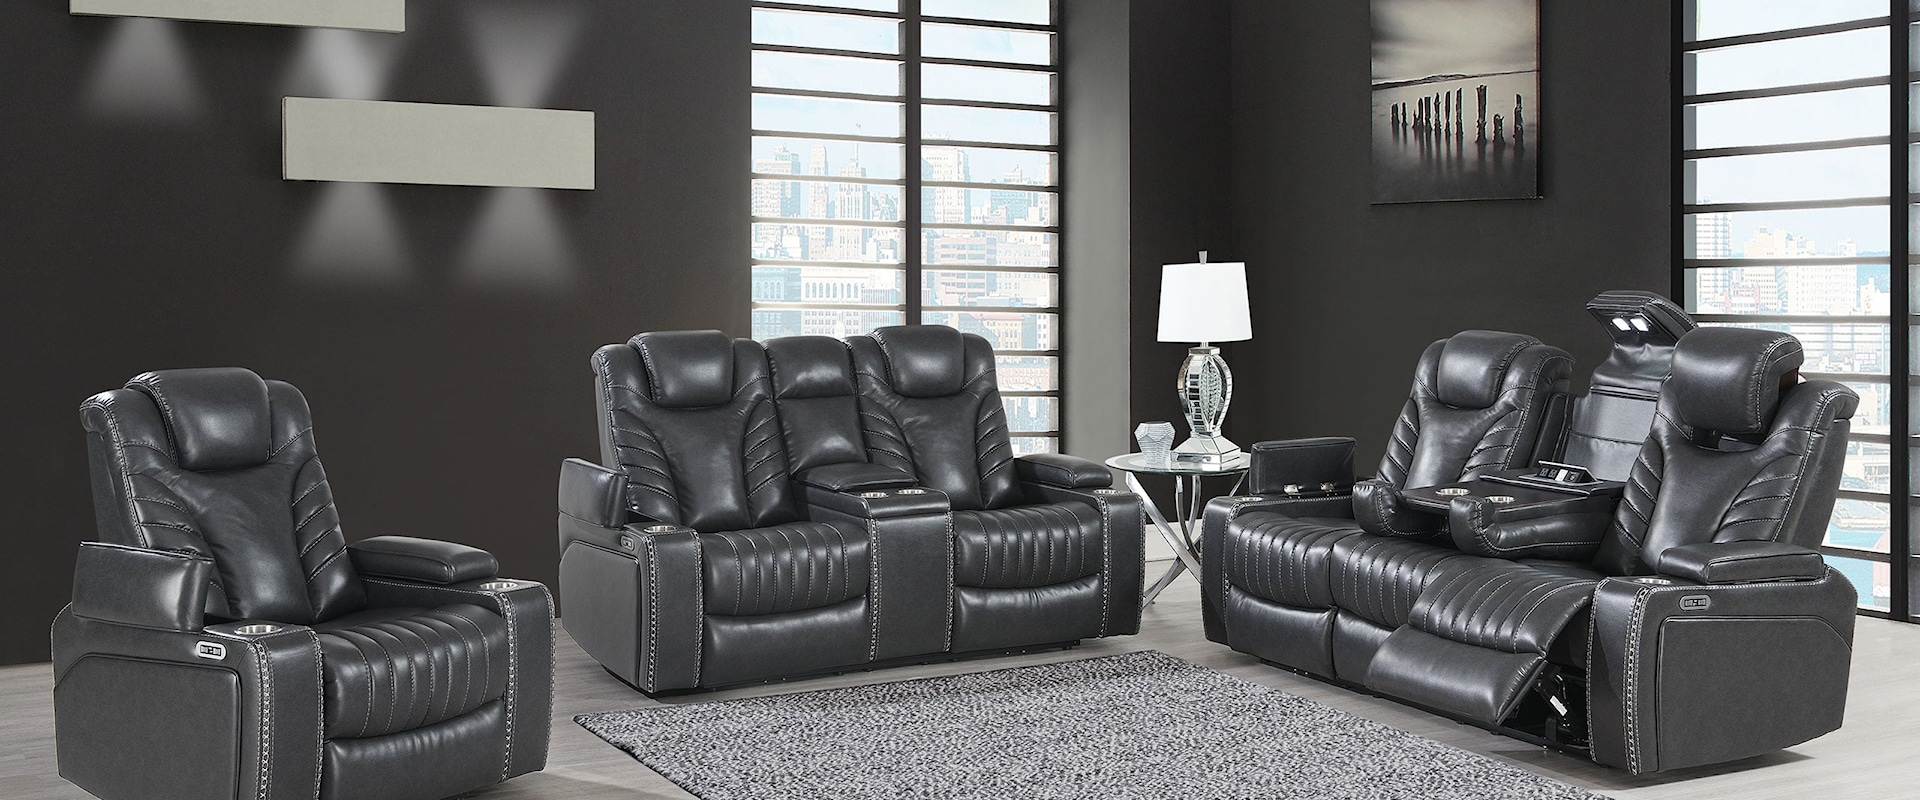 Transitional Power Reclining Sofa, Loveseat with Console and Recliner Set